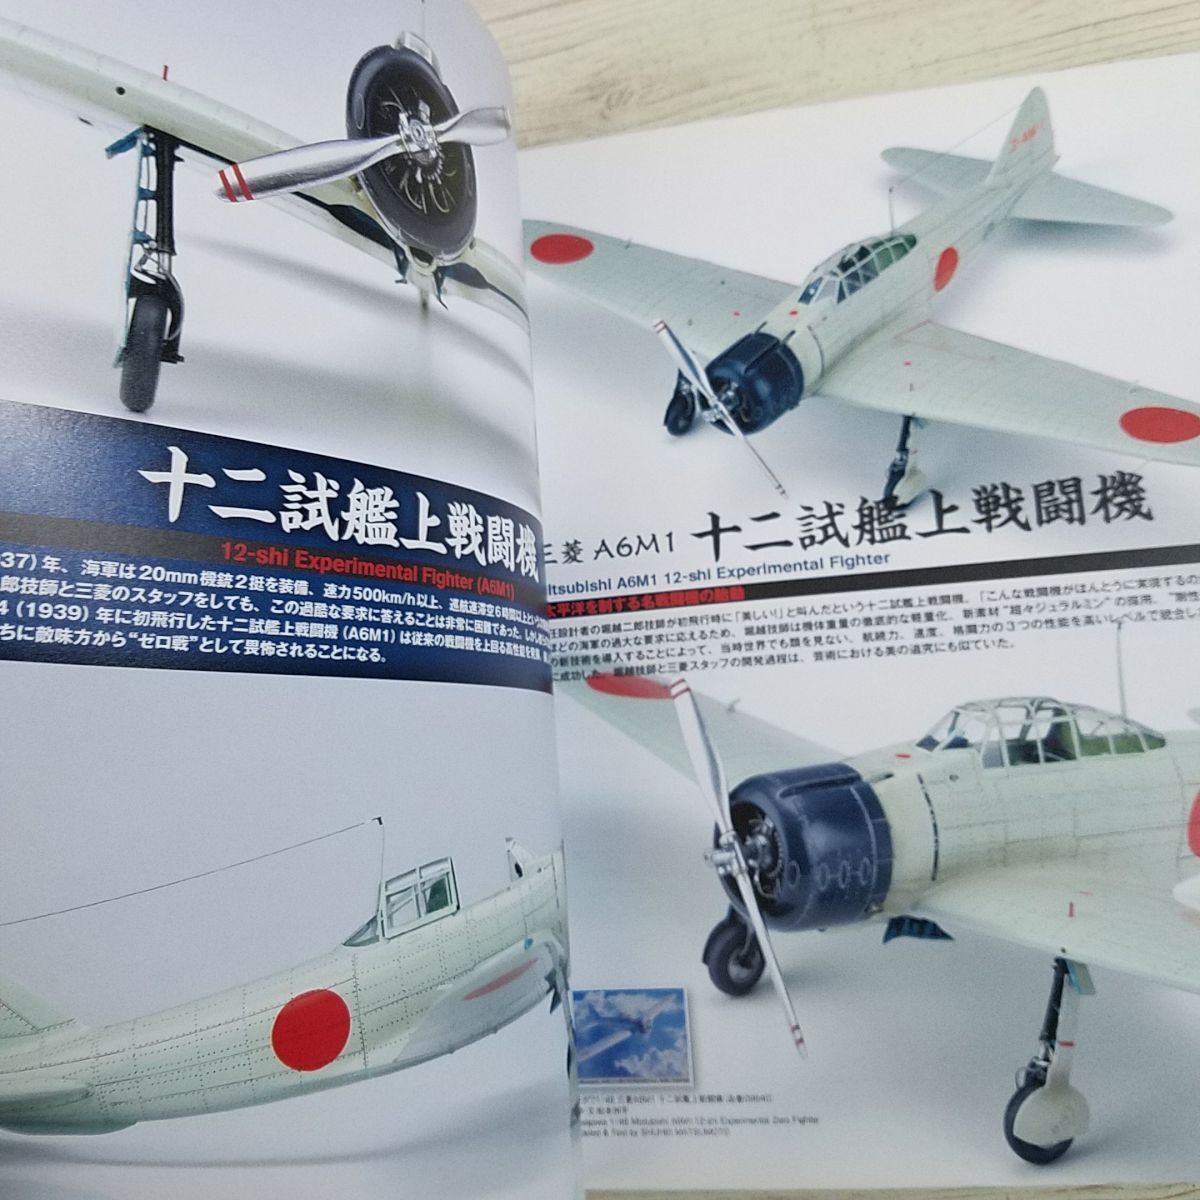  plastic model work [AEROmote ring guide Vol.1 0 type . on fighter (aircraft) ] 1/32,1/48. center .21 item . made 